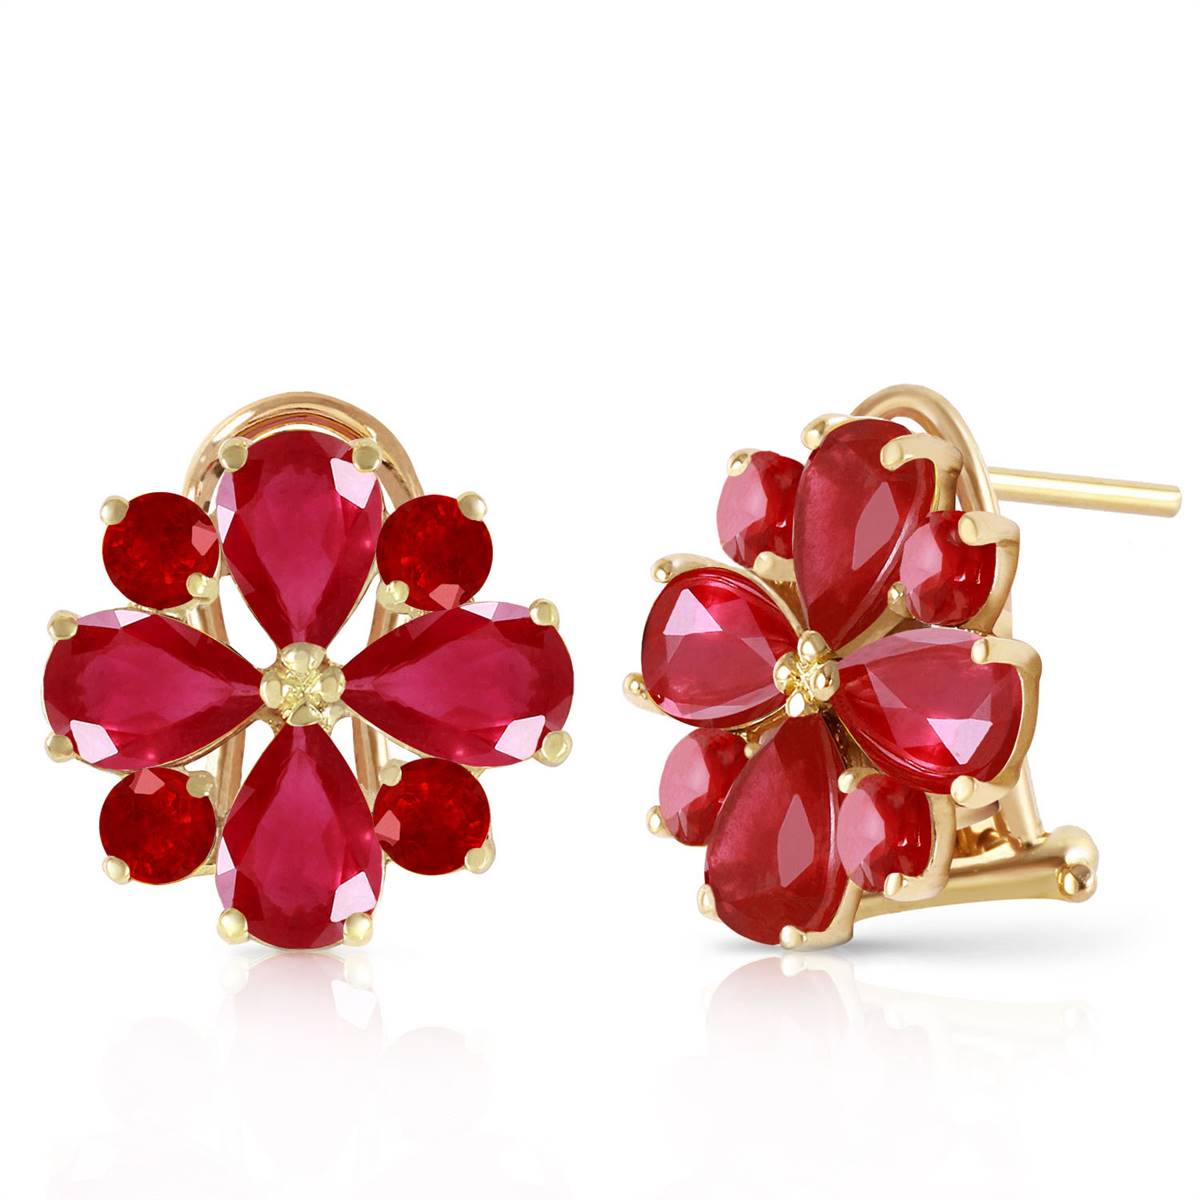 4.85 Carat 14K Solid Yellow Gold French Clips Earrings Natural Ruby